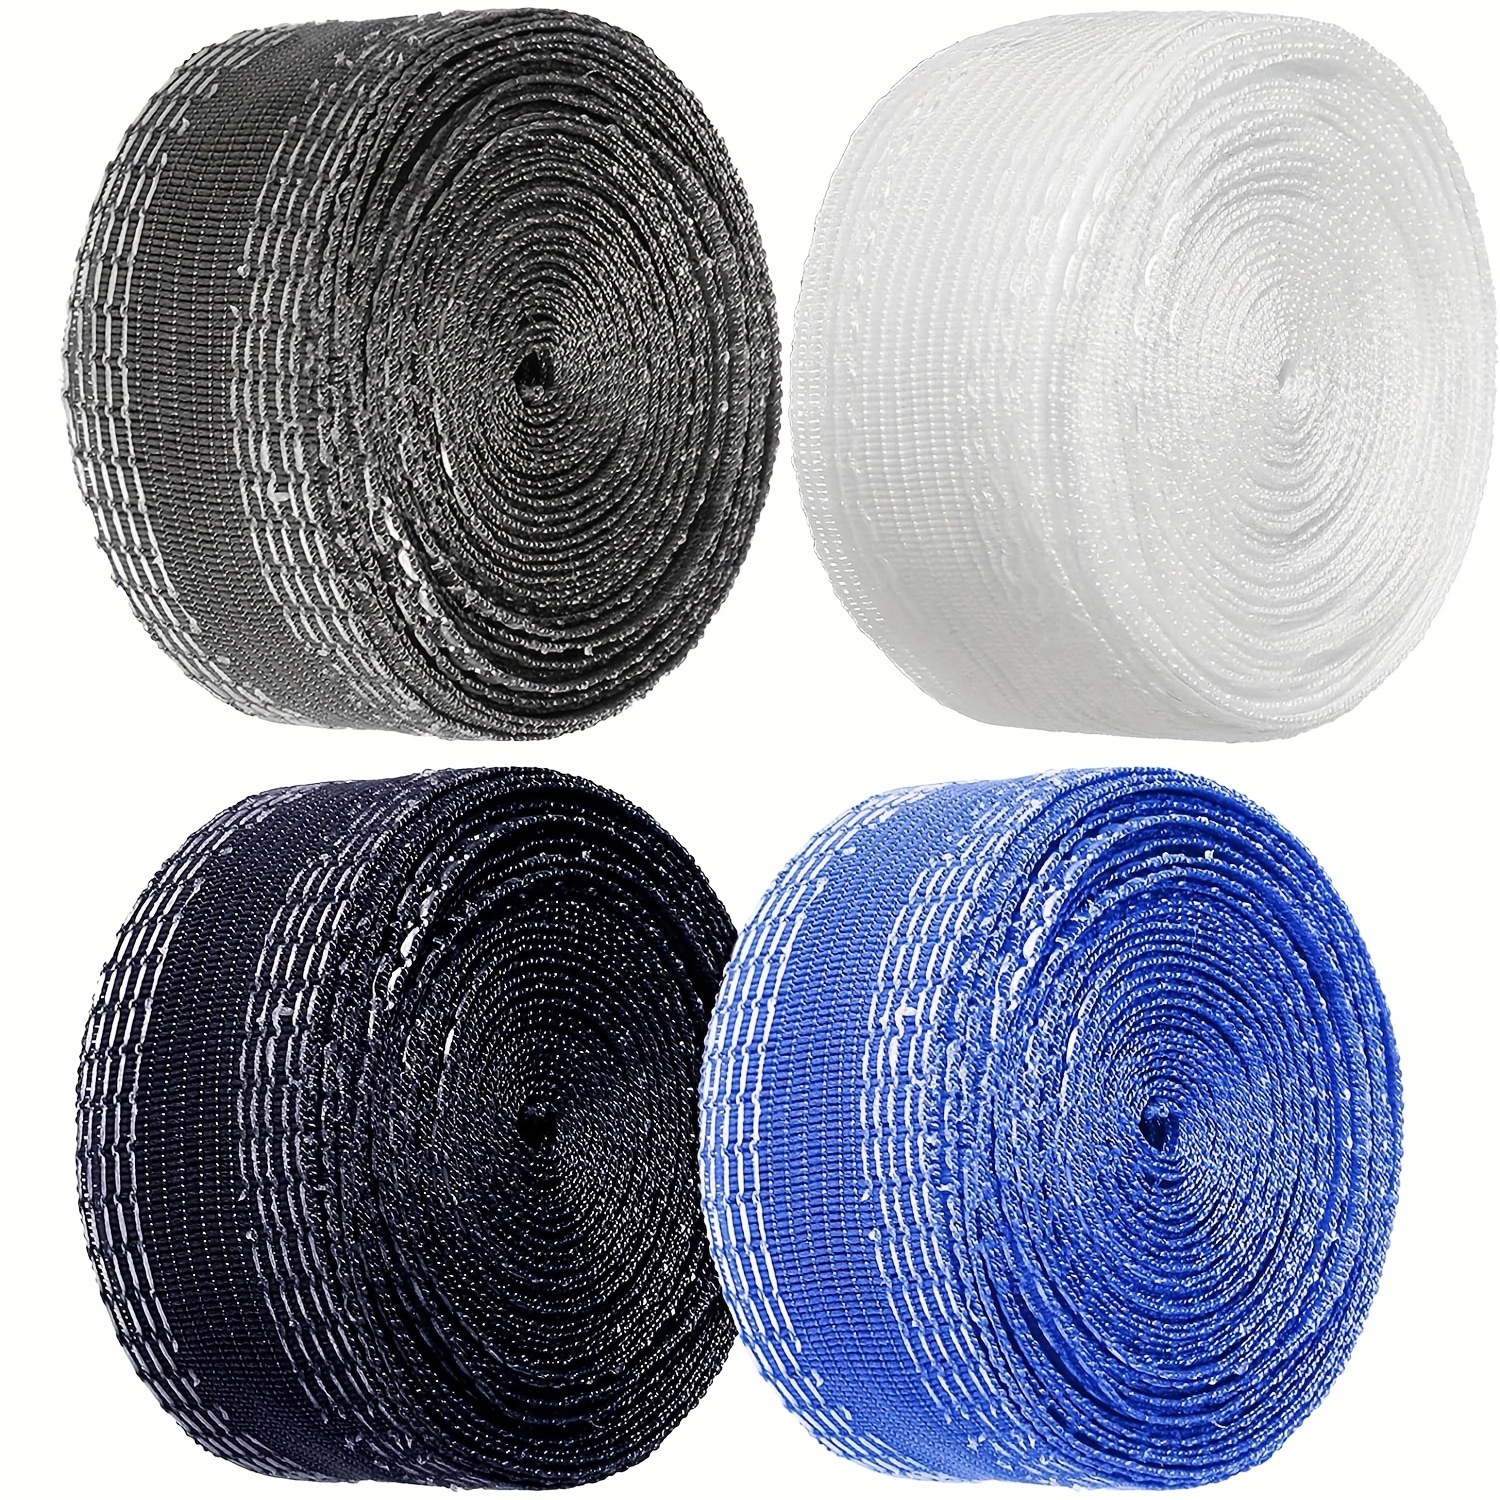 1pc 3.28ft Adhesive Trouser Patch, Fringe Decorative Edge For Jeans,  Iron-On Rolled Hem Tape, Hemming Tape For Pants, Diy Sewing Material